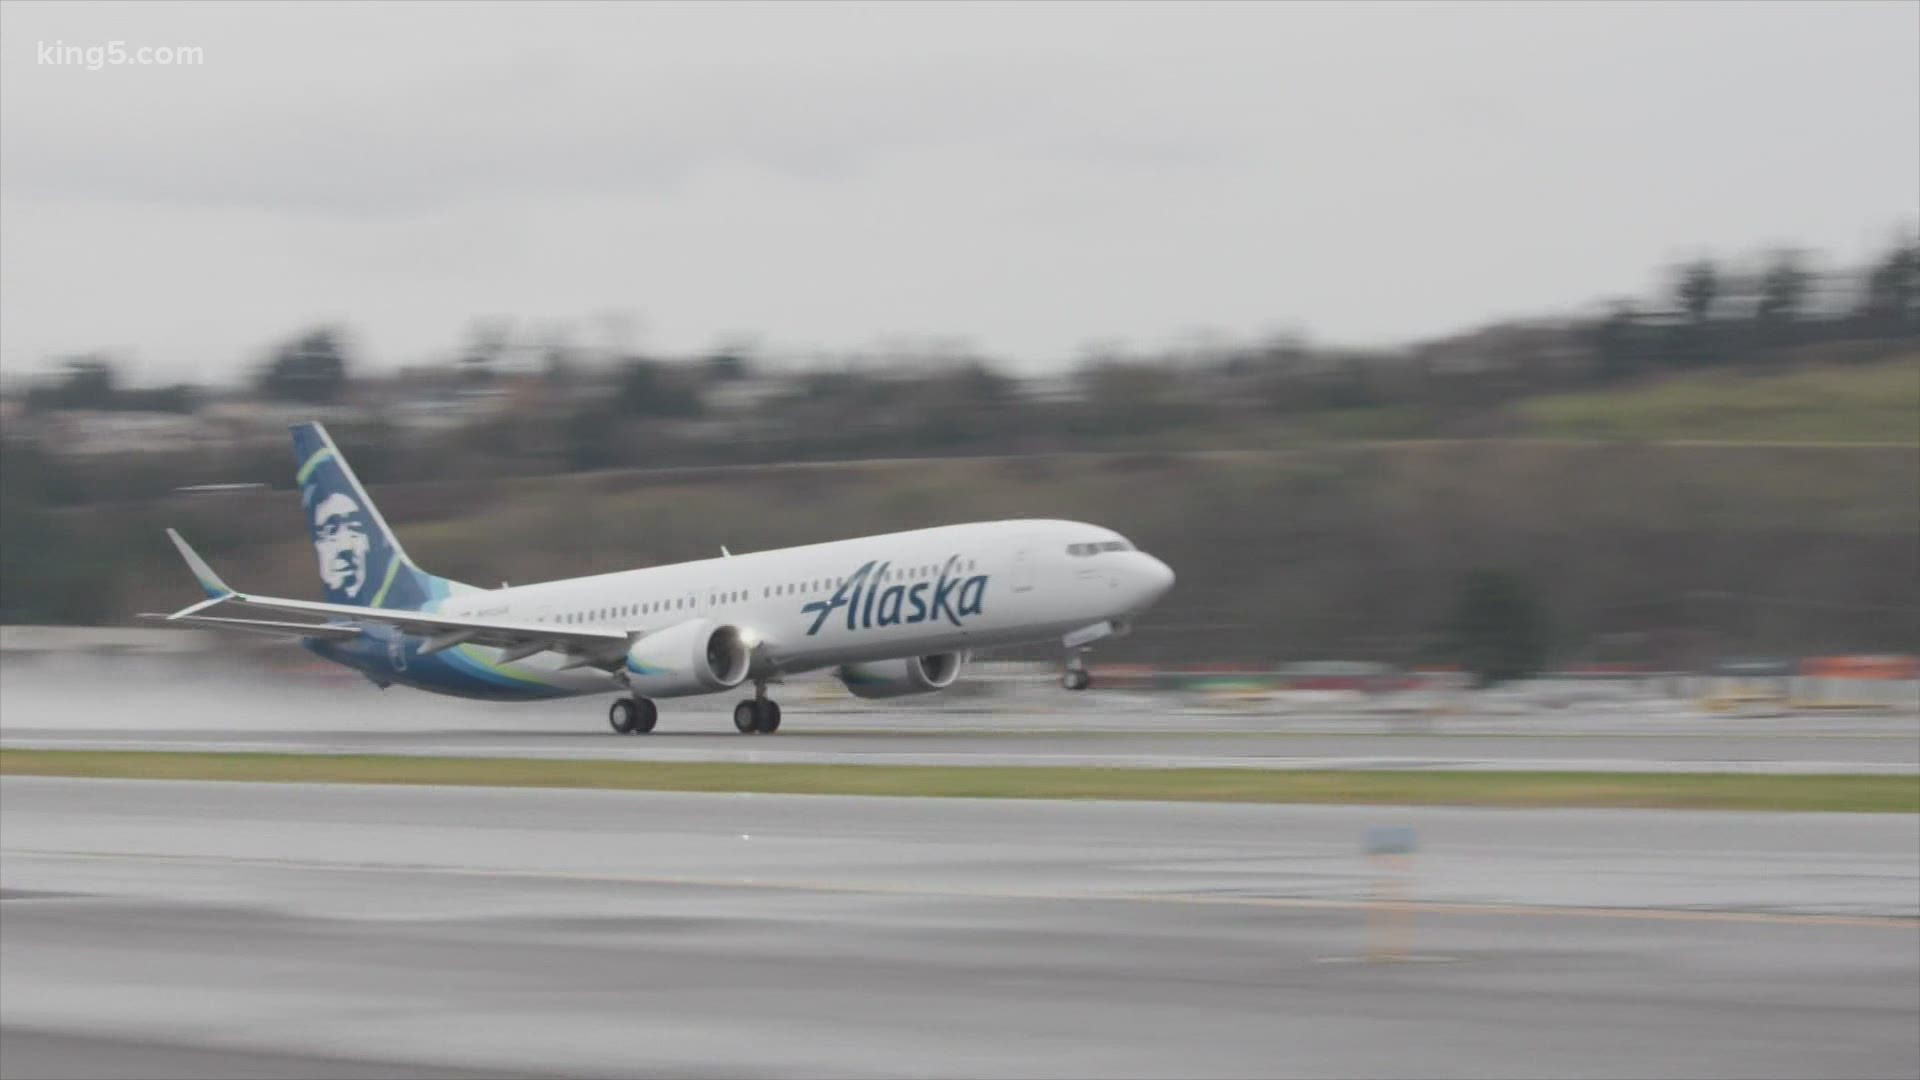 Alaska Airlines made an agreement with the Boeing Company in Seattle to receive a total of 68 of the new 737-9 MAX aircraft in the next four years.